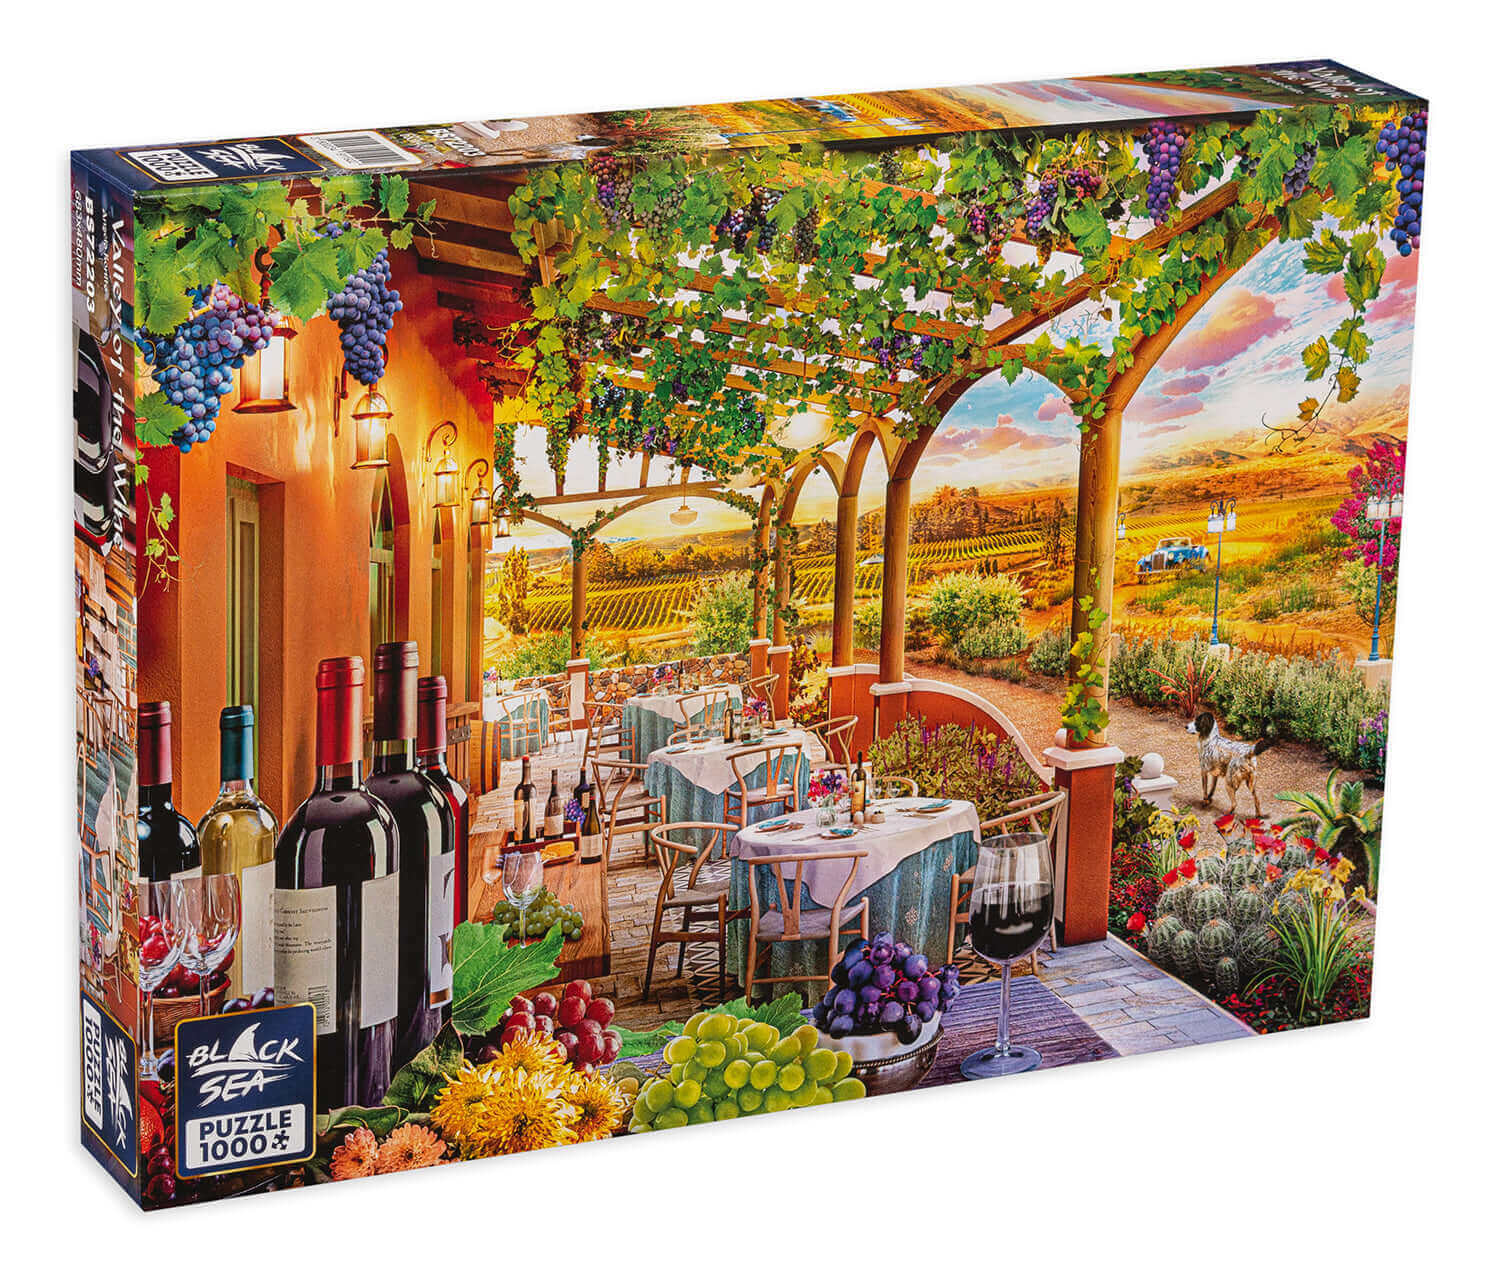 Puzzle Black Sea Premium 1000 pieces - Valley of the Wine, It is that time of the year when the caress of the sun brings sweetness to the grapes on their vines across the lands. Choose a table and enjoy a glass of tasty chilled wine in the coolness of the